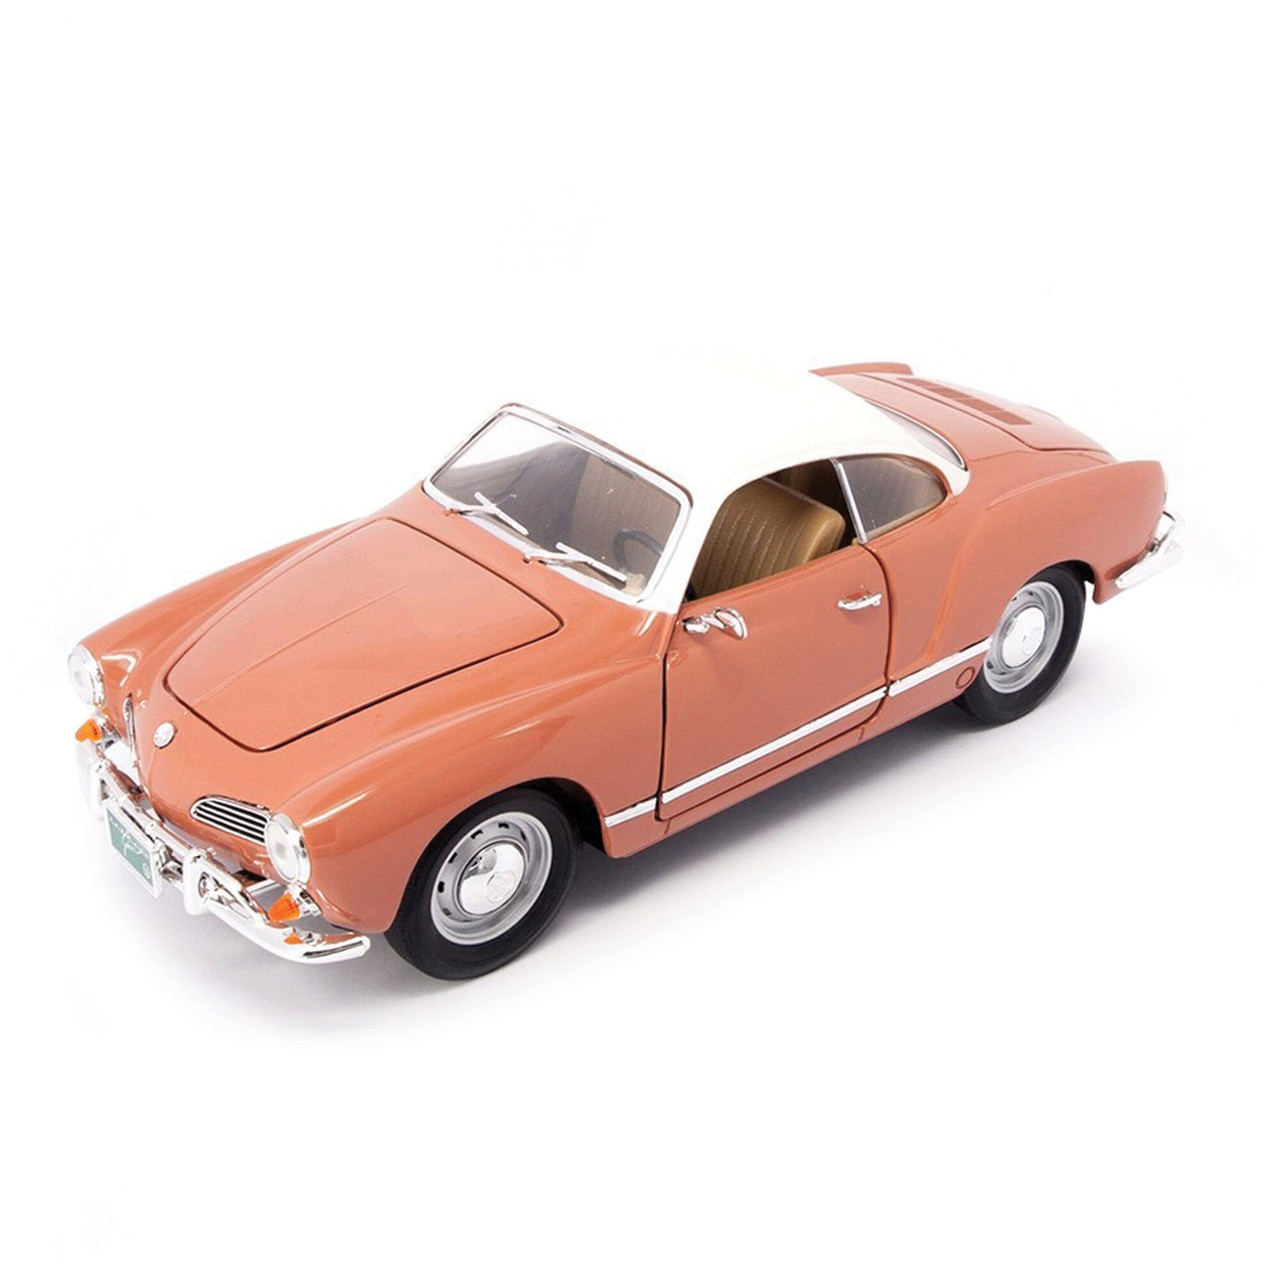 1966 VOLKSWAGEN KARMANN GHIA CORAL 1/18 DIECAST MODEL BY ROAD SIGNATURE 92198 